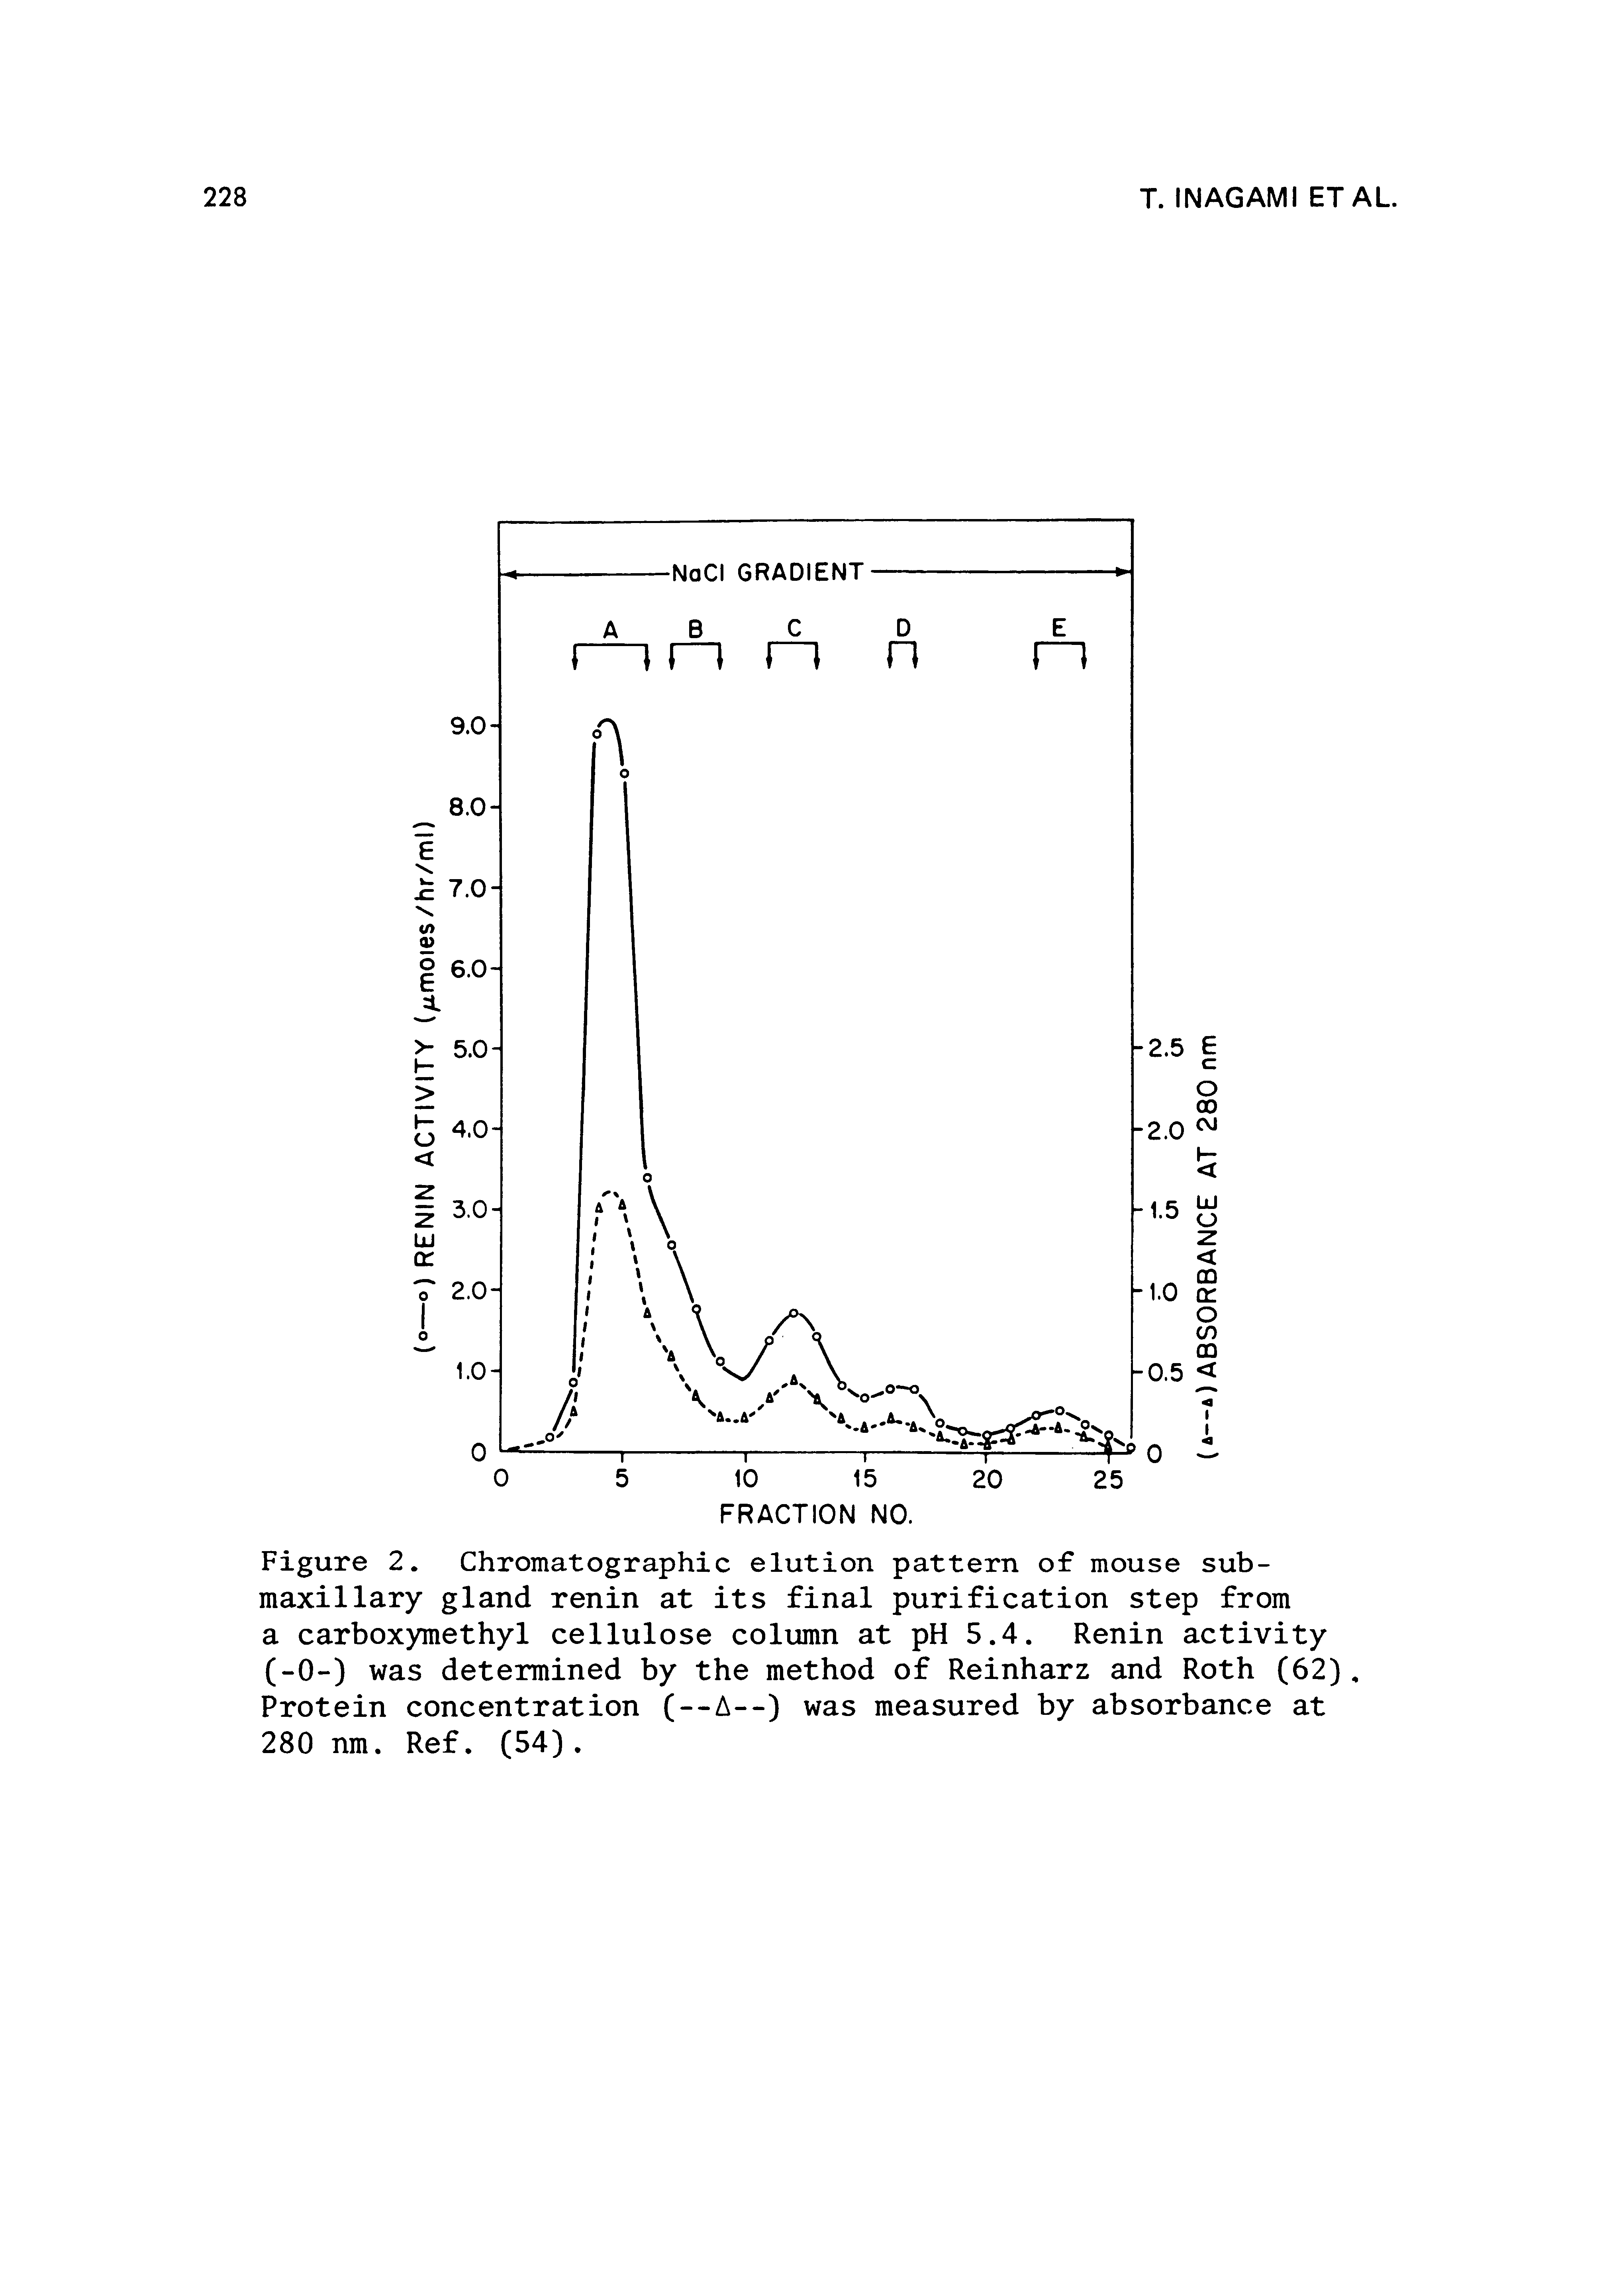 Figure 2. Chromatographic elution pattern of mouse sub-maxillary gland renin at its final purification step from a carboxymethyl cellulose column at pH 5.4. Renin activity (-0-) was determined by the method of Reinharz and Roth (62), Protein concentration (—A--) was measured by absorbance at 280 nm. Ref. (54).